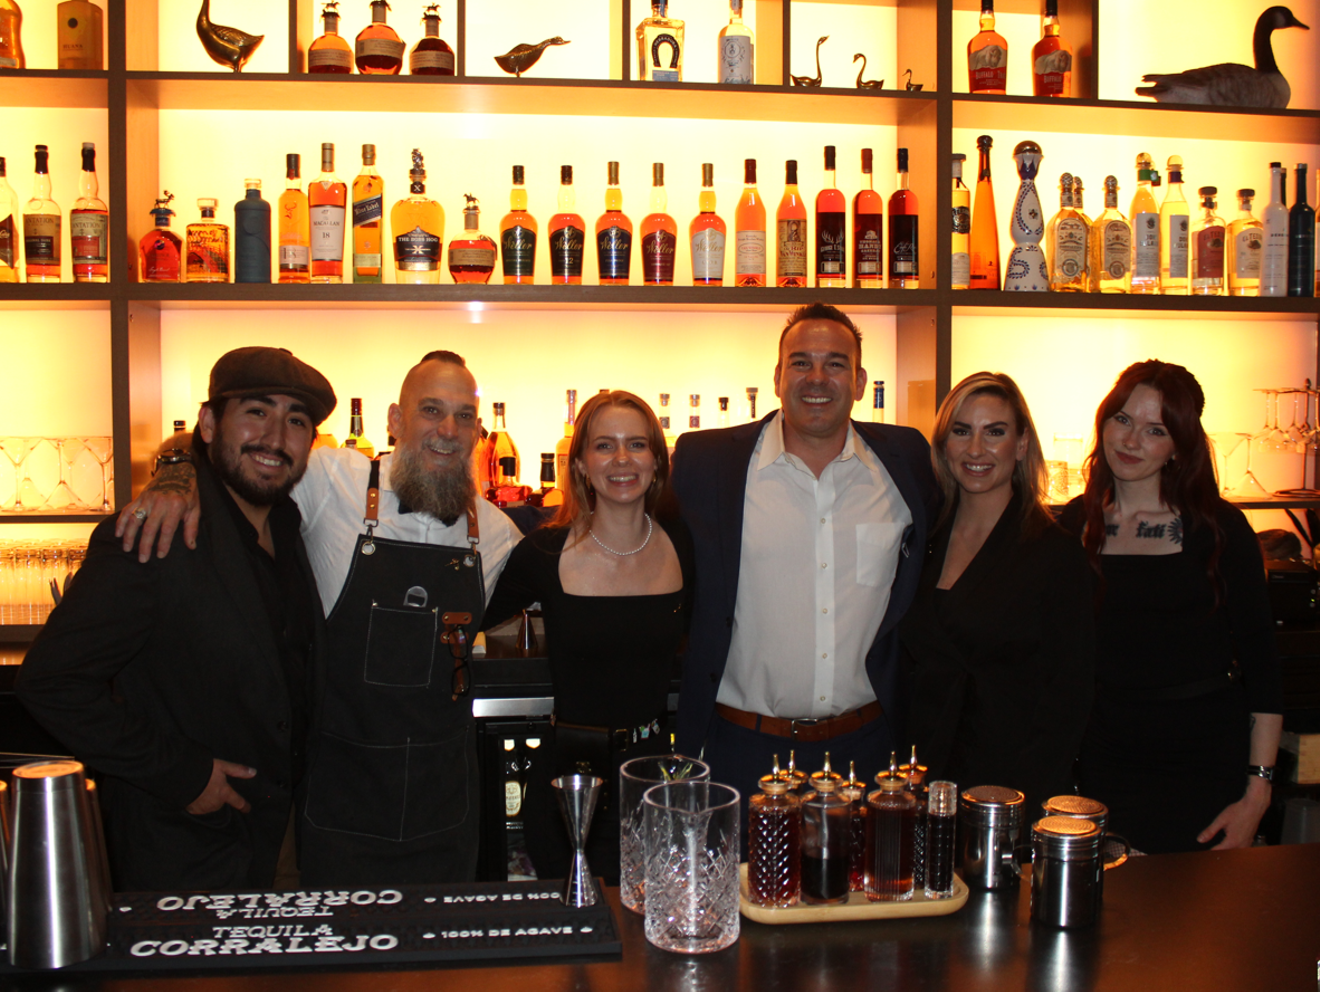 Michael Merendino (third from right) and his team are opening their latest bird-themed bar in Scottsdale on Friday.